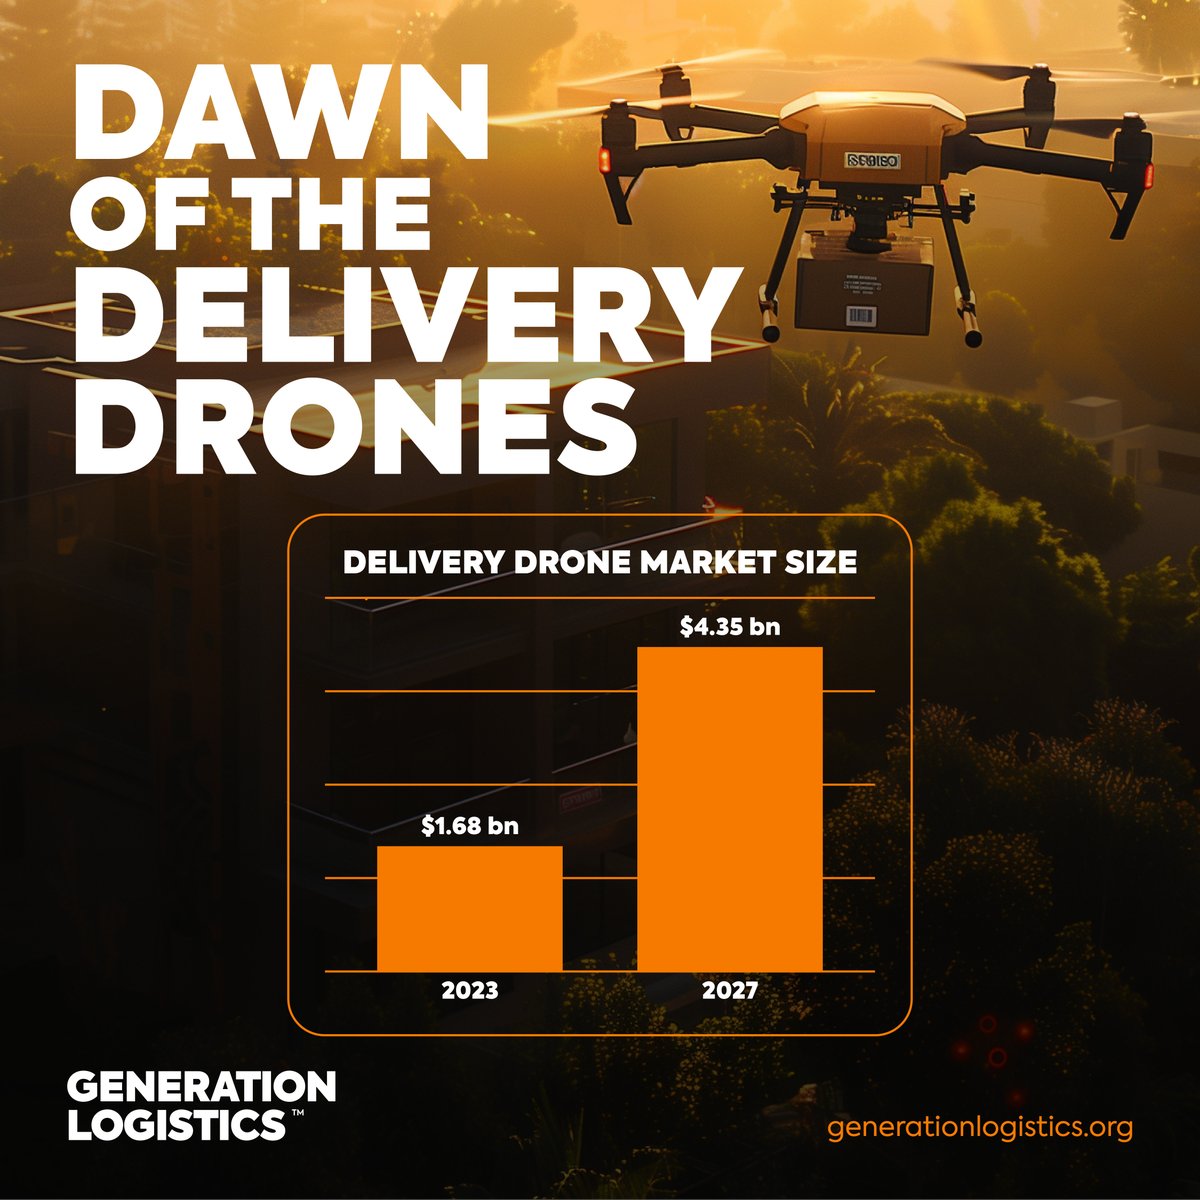 The future is now 😎 #Automation #Logistics #Drones